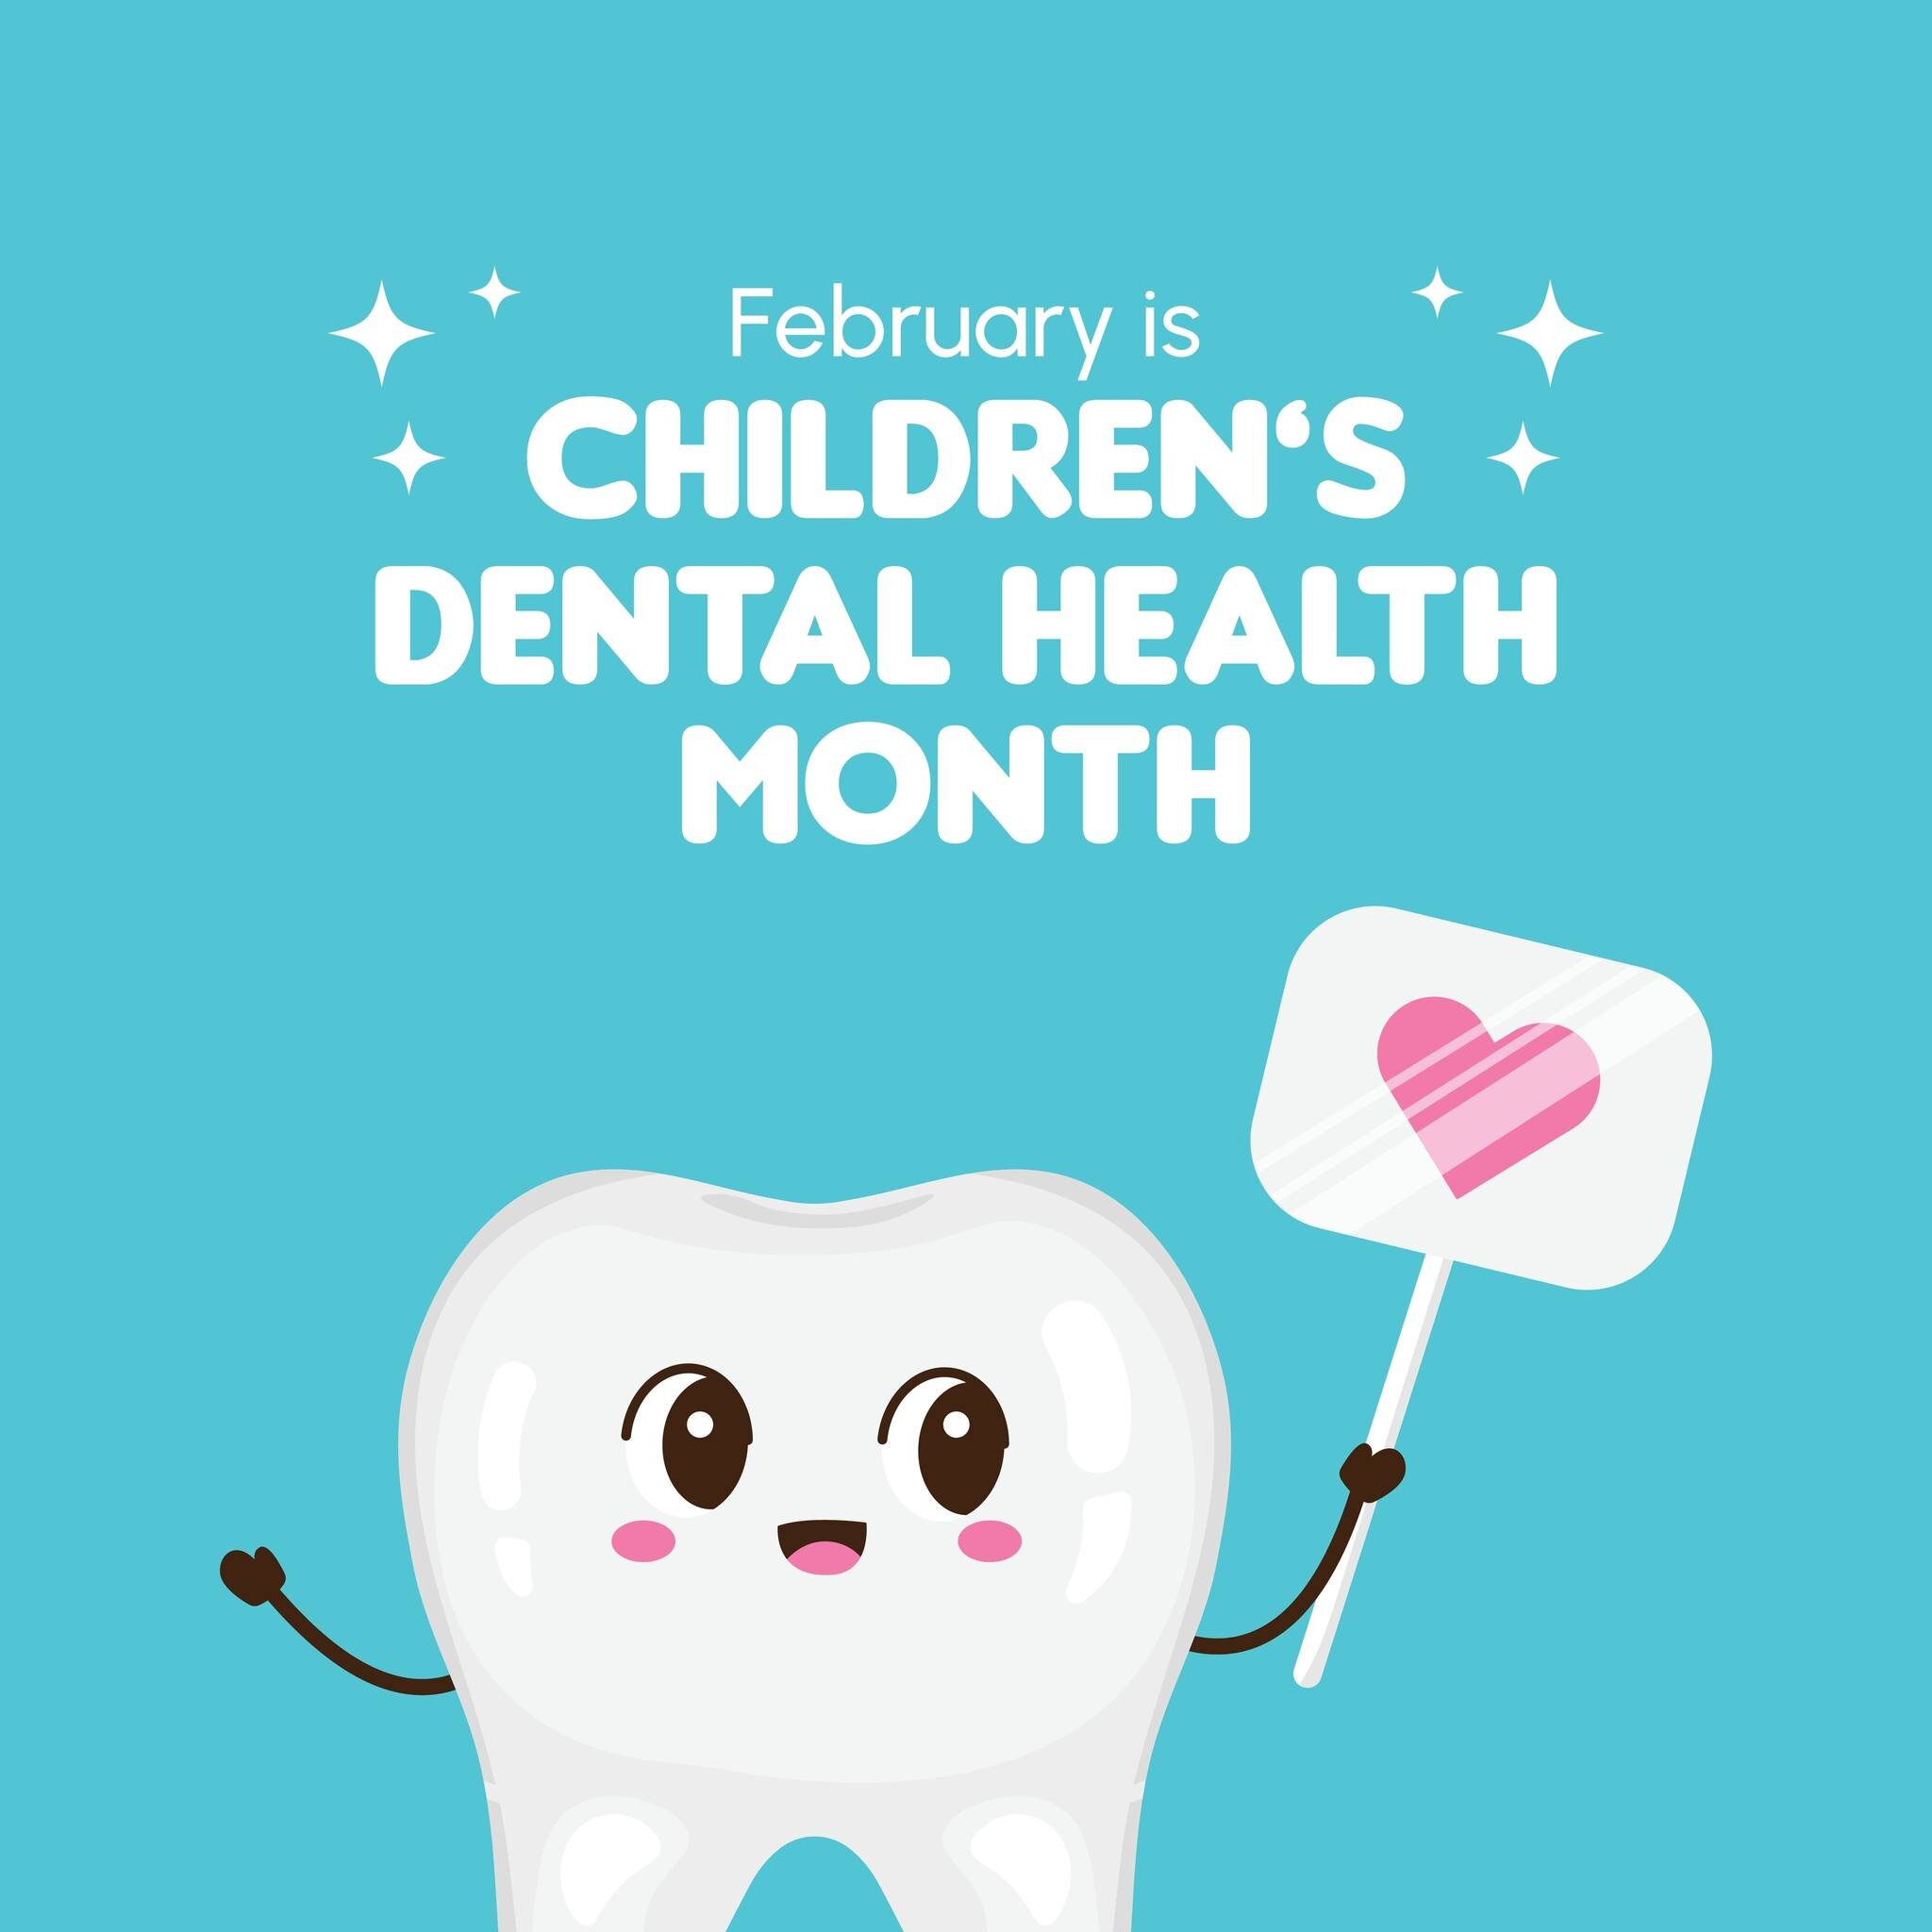 February is National Children's Dental Health Month, emphasizing the importance of preventable cavities. Cavities (also known as caries or tooth decay) are the most prevalent chronic pediatric disease in the United States. Cavities that go untreated 